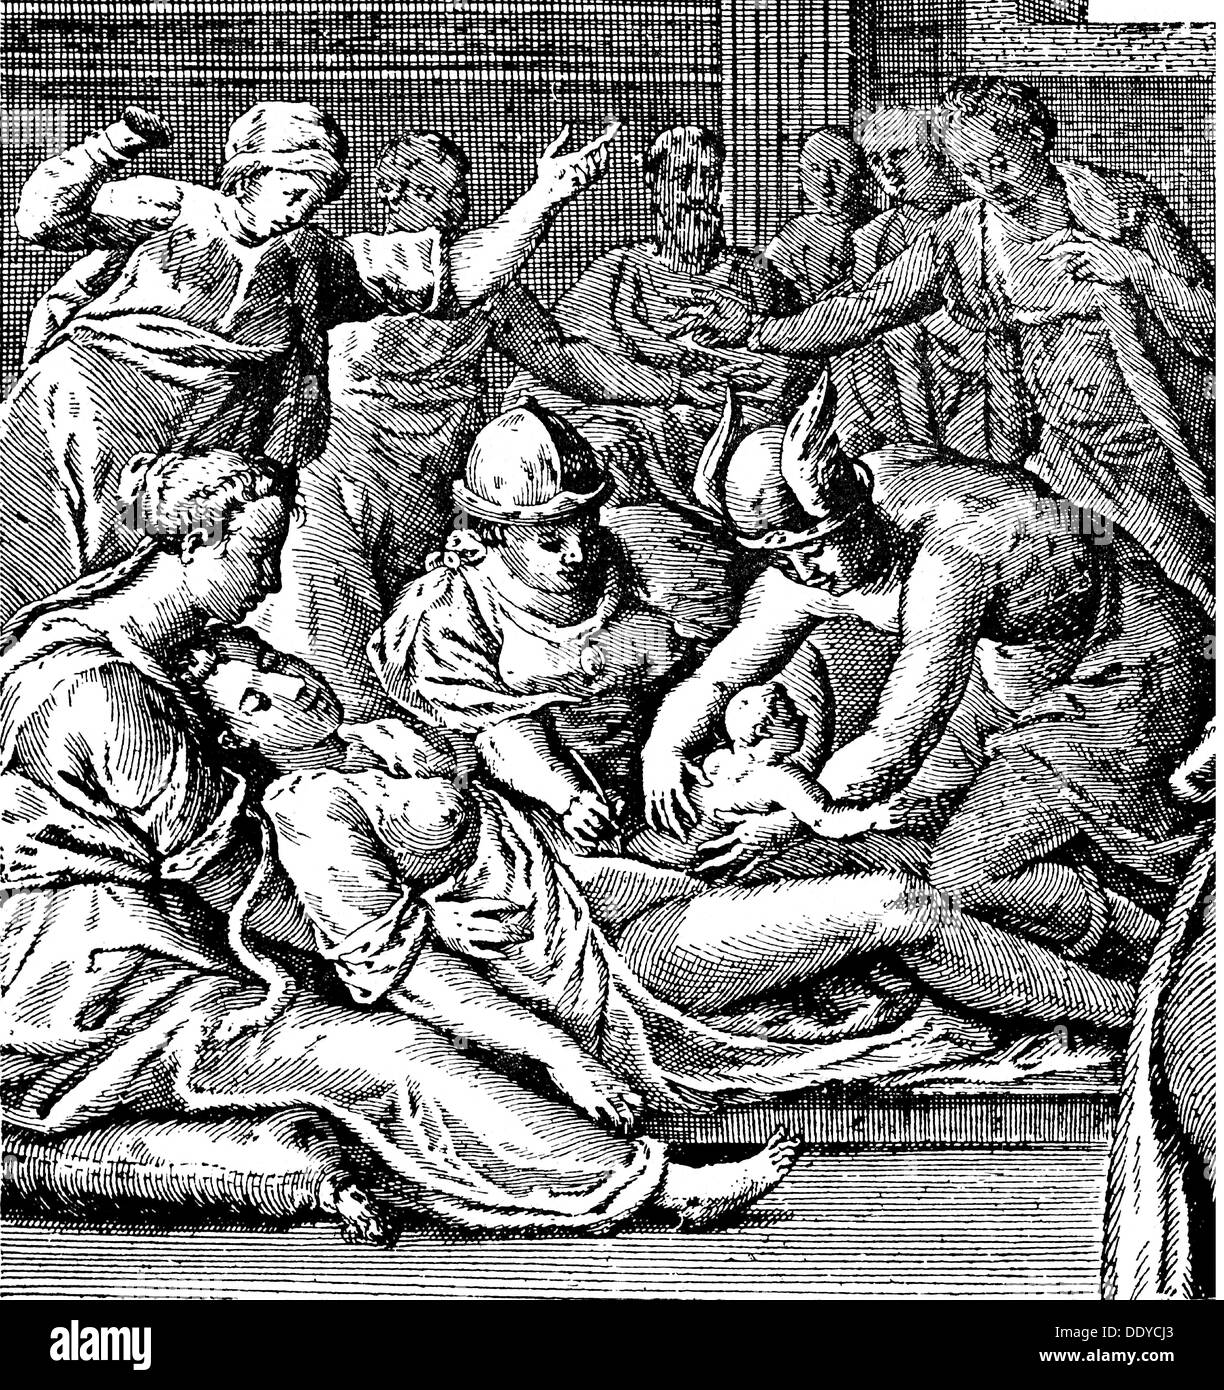 medicine, birth / gynecology, birth of Dionysus by Caesarean, copper engraving by Raphael Custos (circa 1591 - 1664), 17th century, 17th century, graphic, graphics, pregnant woman, pregnant women, sitting, sit, half length, belly, bellies, tummy, cutting, cut, cuts, operation, undergo surgery, need surgery, operating, operate, holding, hold, birthing, bear, give birth, delivery, childbearing, childbirth, abdomen, ancient world, ancient times, religion, religions, mythology, legend, legends, God, Gods, deity, divinity, deities, goddess, goddesses, Herme, Artist's Copyright has not to be cleared Stock Photo